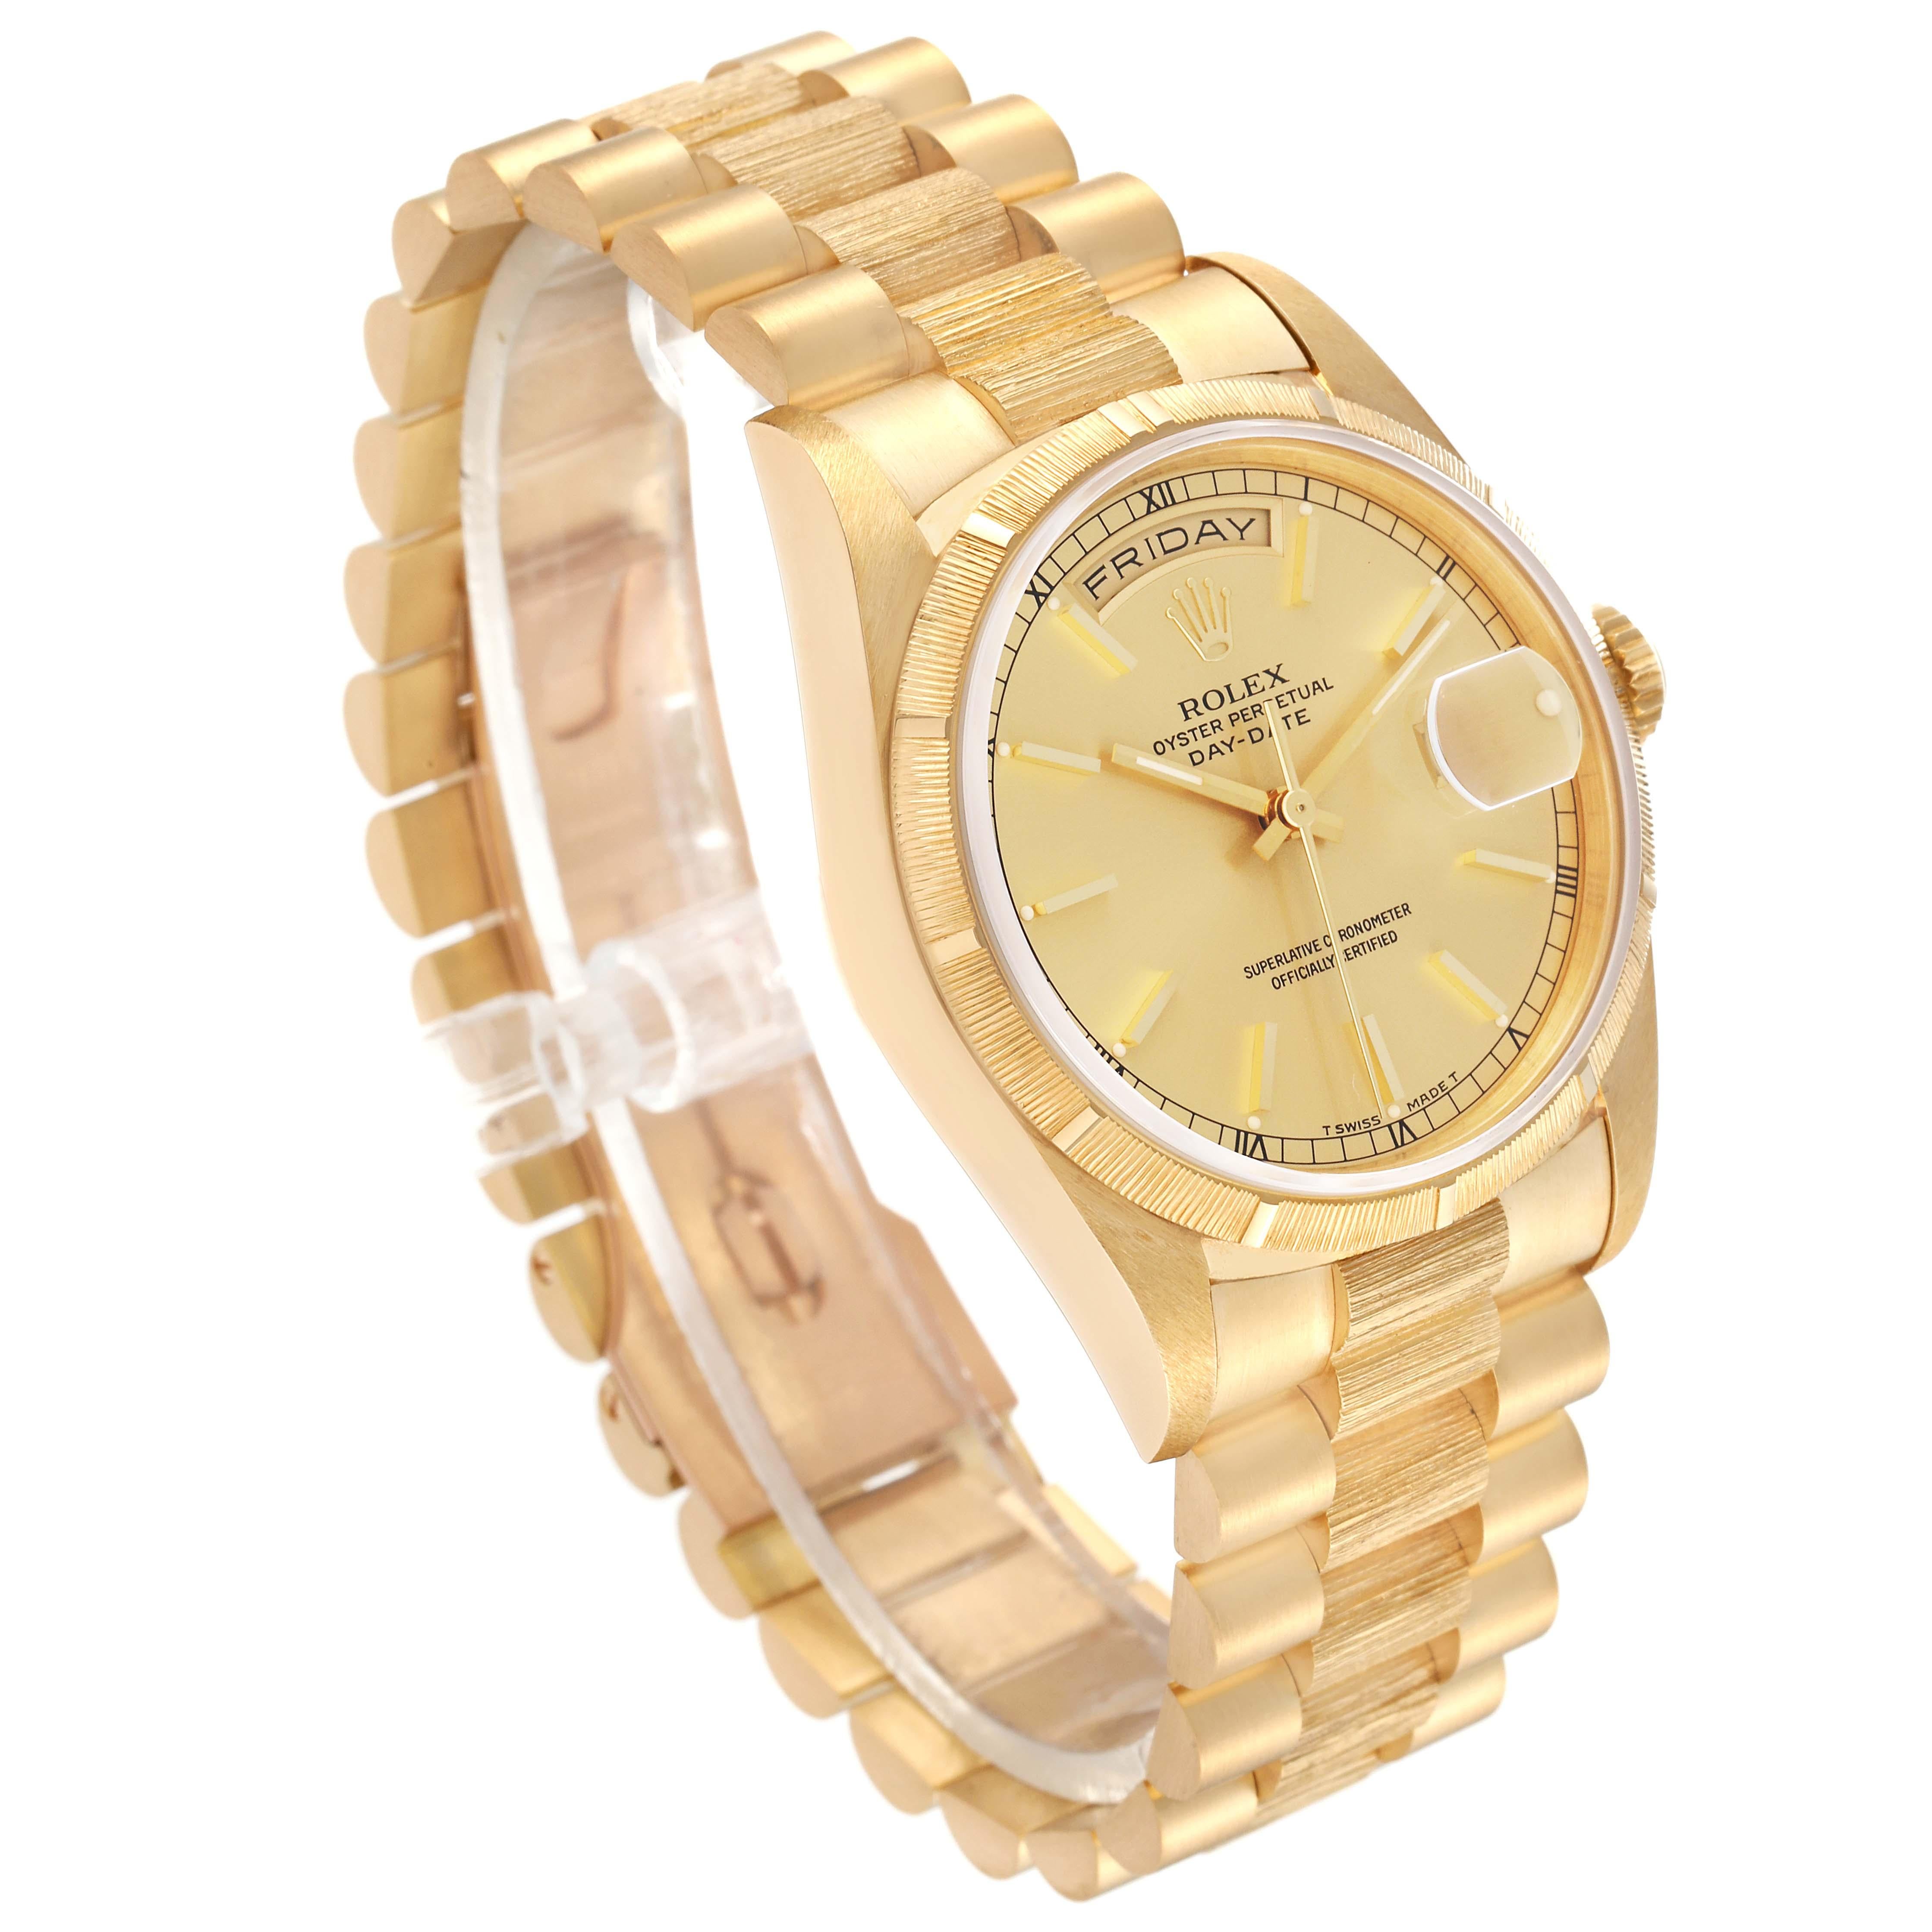 Rolex Day-Date President Yellow Gold Bark Finish Mens Watch 18248 For Sale 2